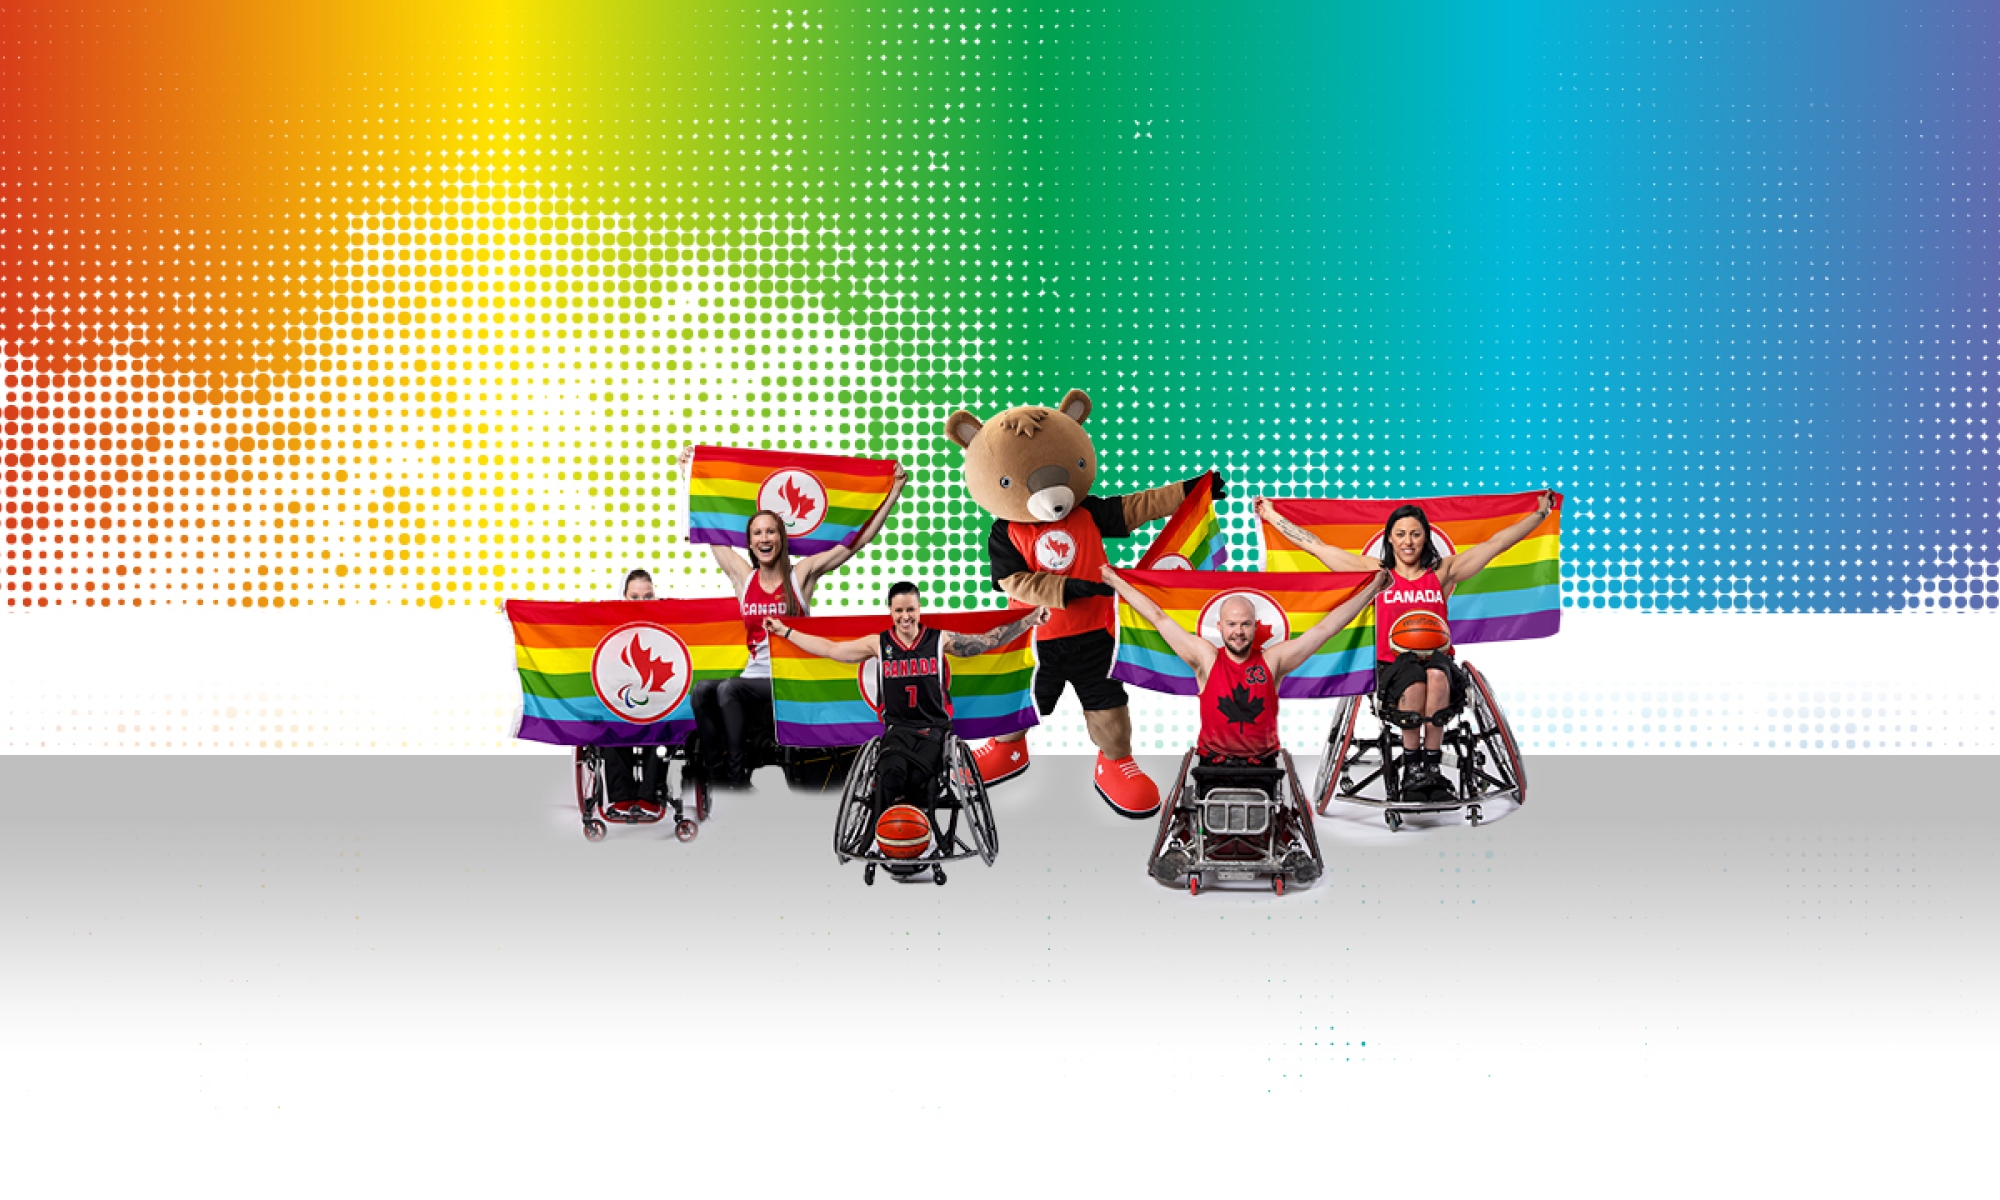 Athletes and Coda the beaver mascot with pride flags